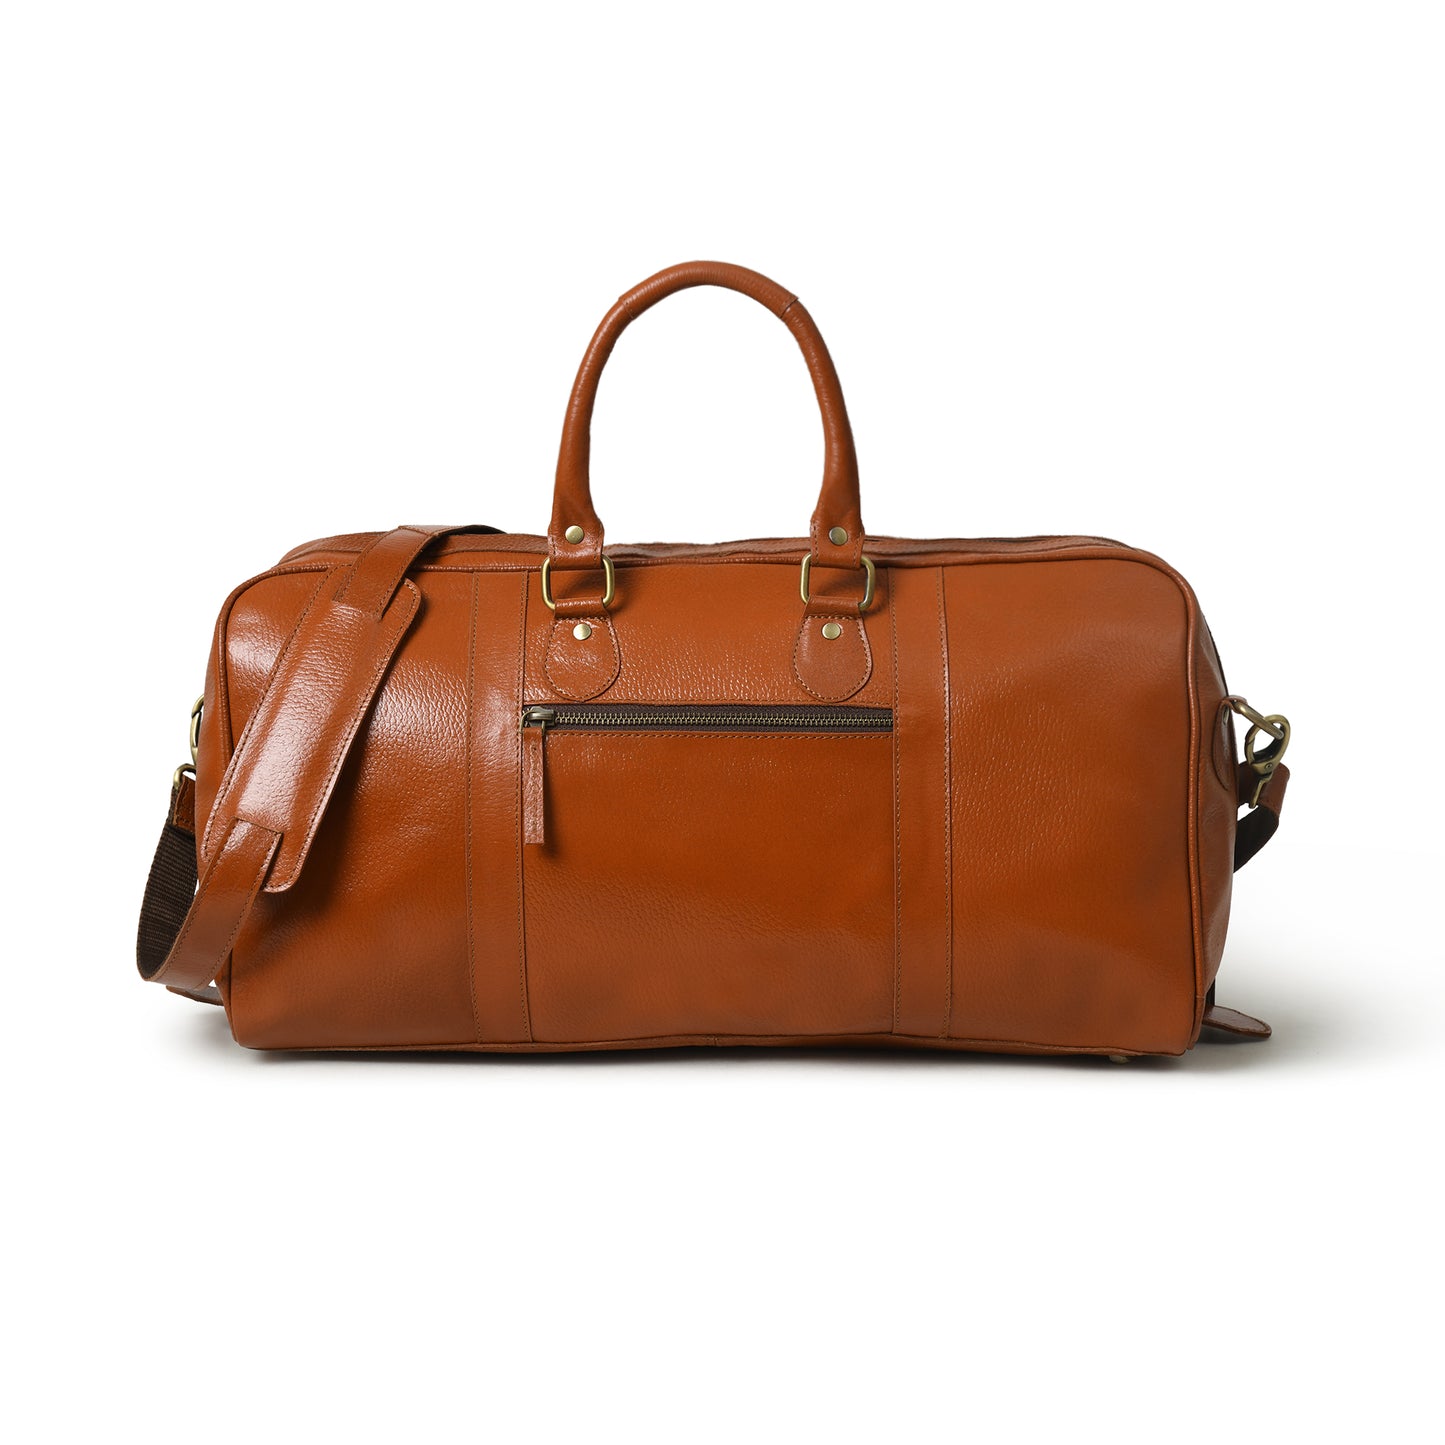 The Brown Crunch Duffle